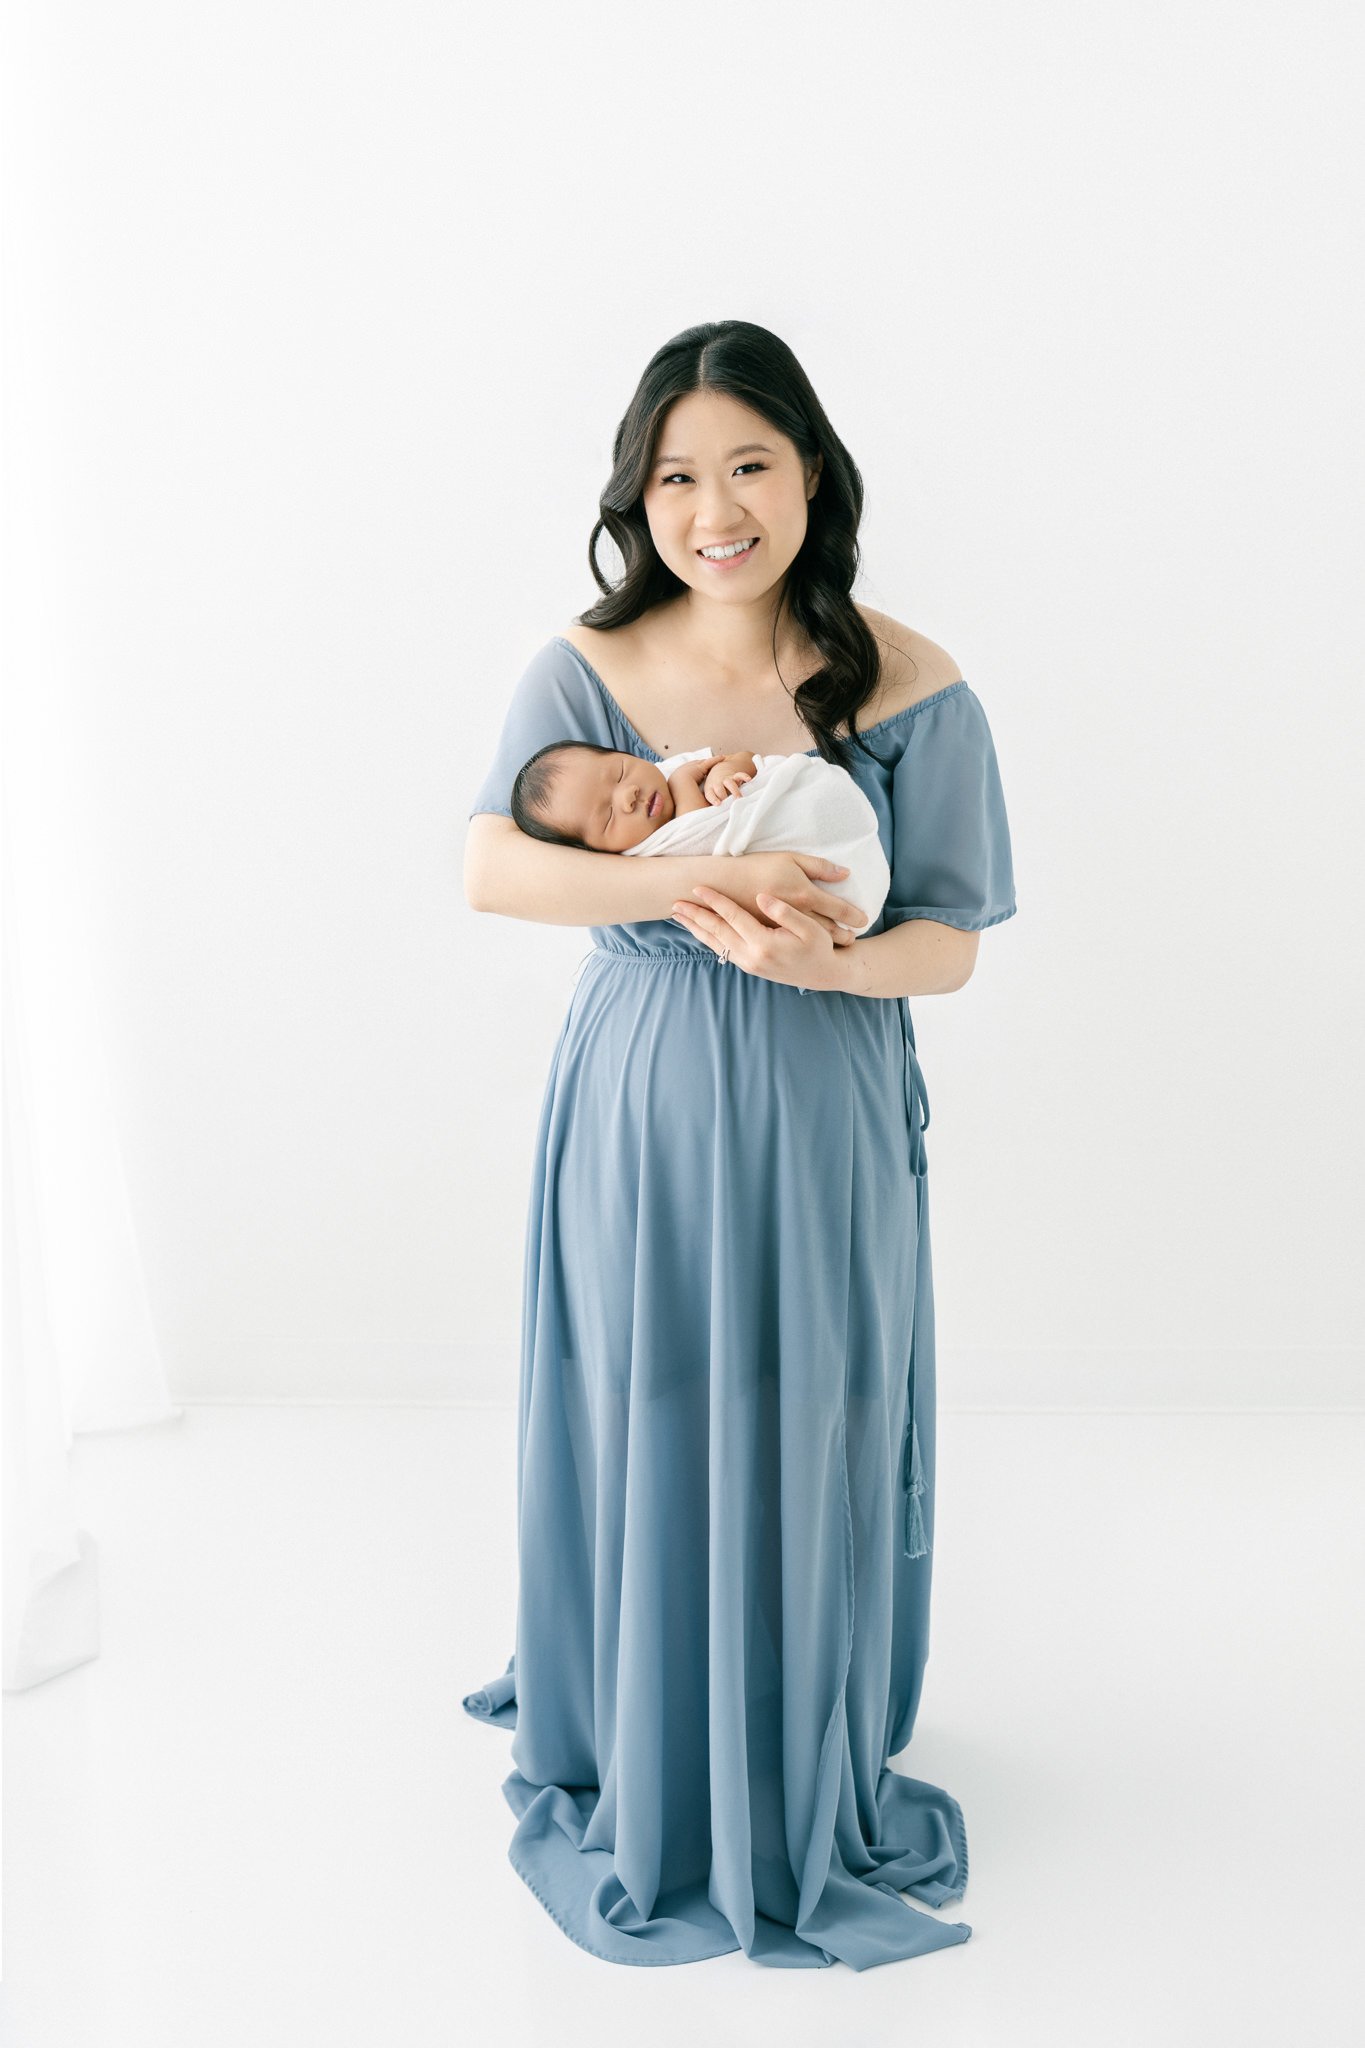  A mother in a blue gown holds her sleeping newborn baby boy by Nicole Hawkins Phtoography in New Jersey. New Jersey Newborn Photography #NicoleHawkinsPhotography #NicoleHawkinsNewborns #Babyboy #studionewbornsNJ #studionewbonportraits #NYnewbornphot